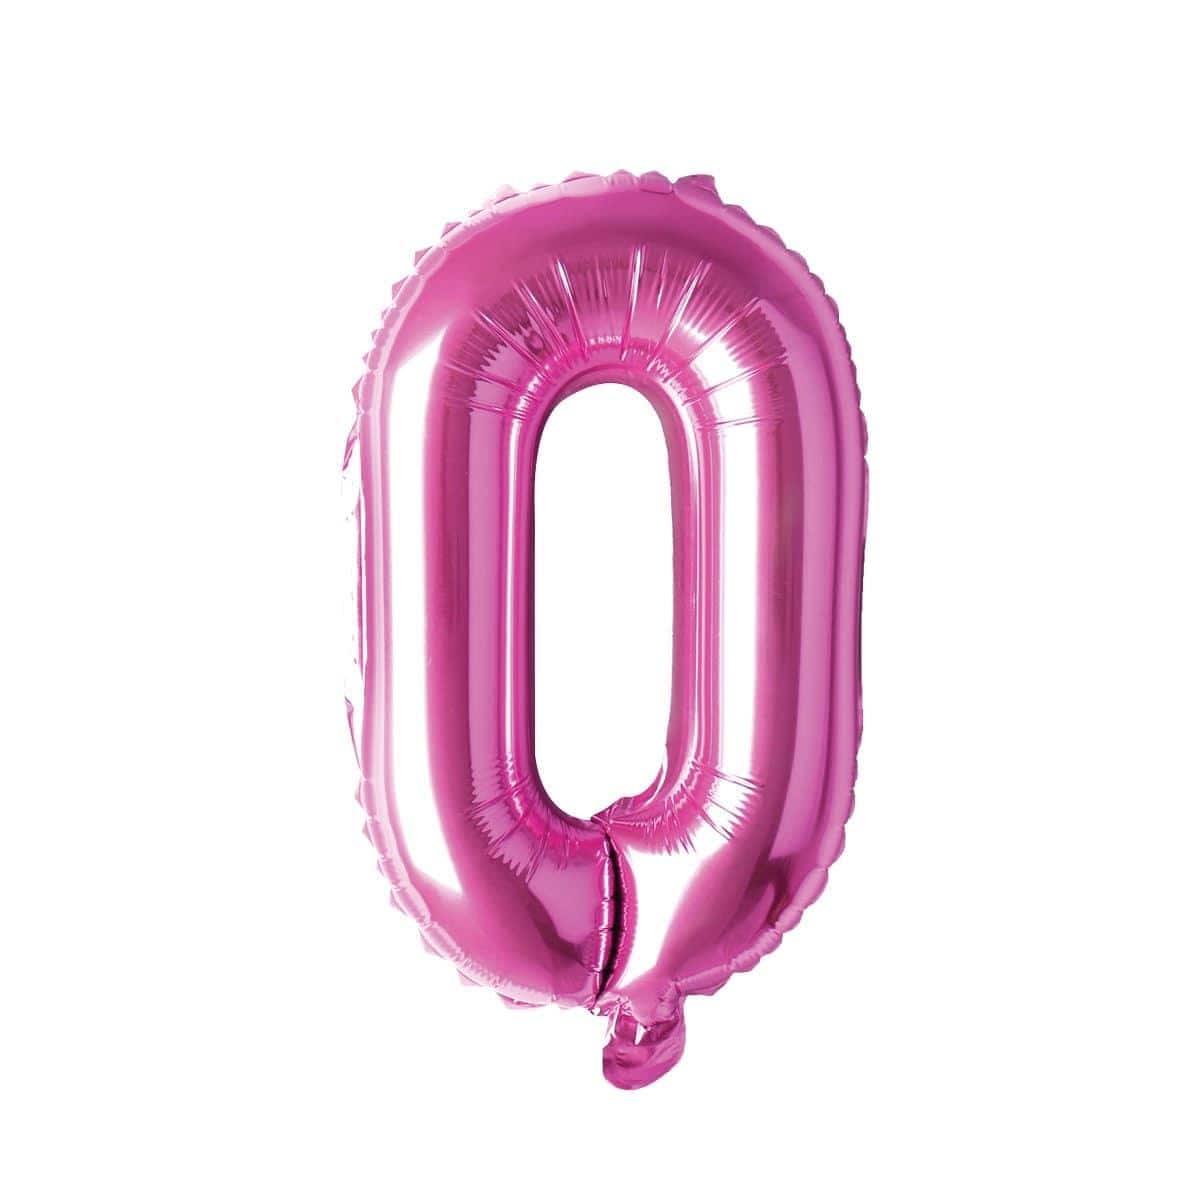 Buy Balloons Pink Letter O Foil Balloon, 16 Inches sold at Party Expert